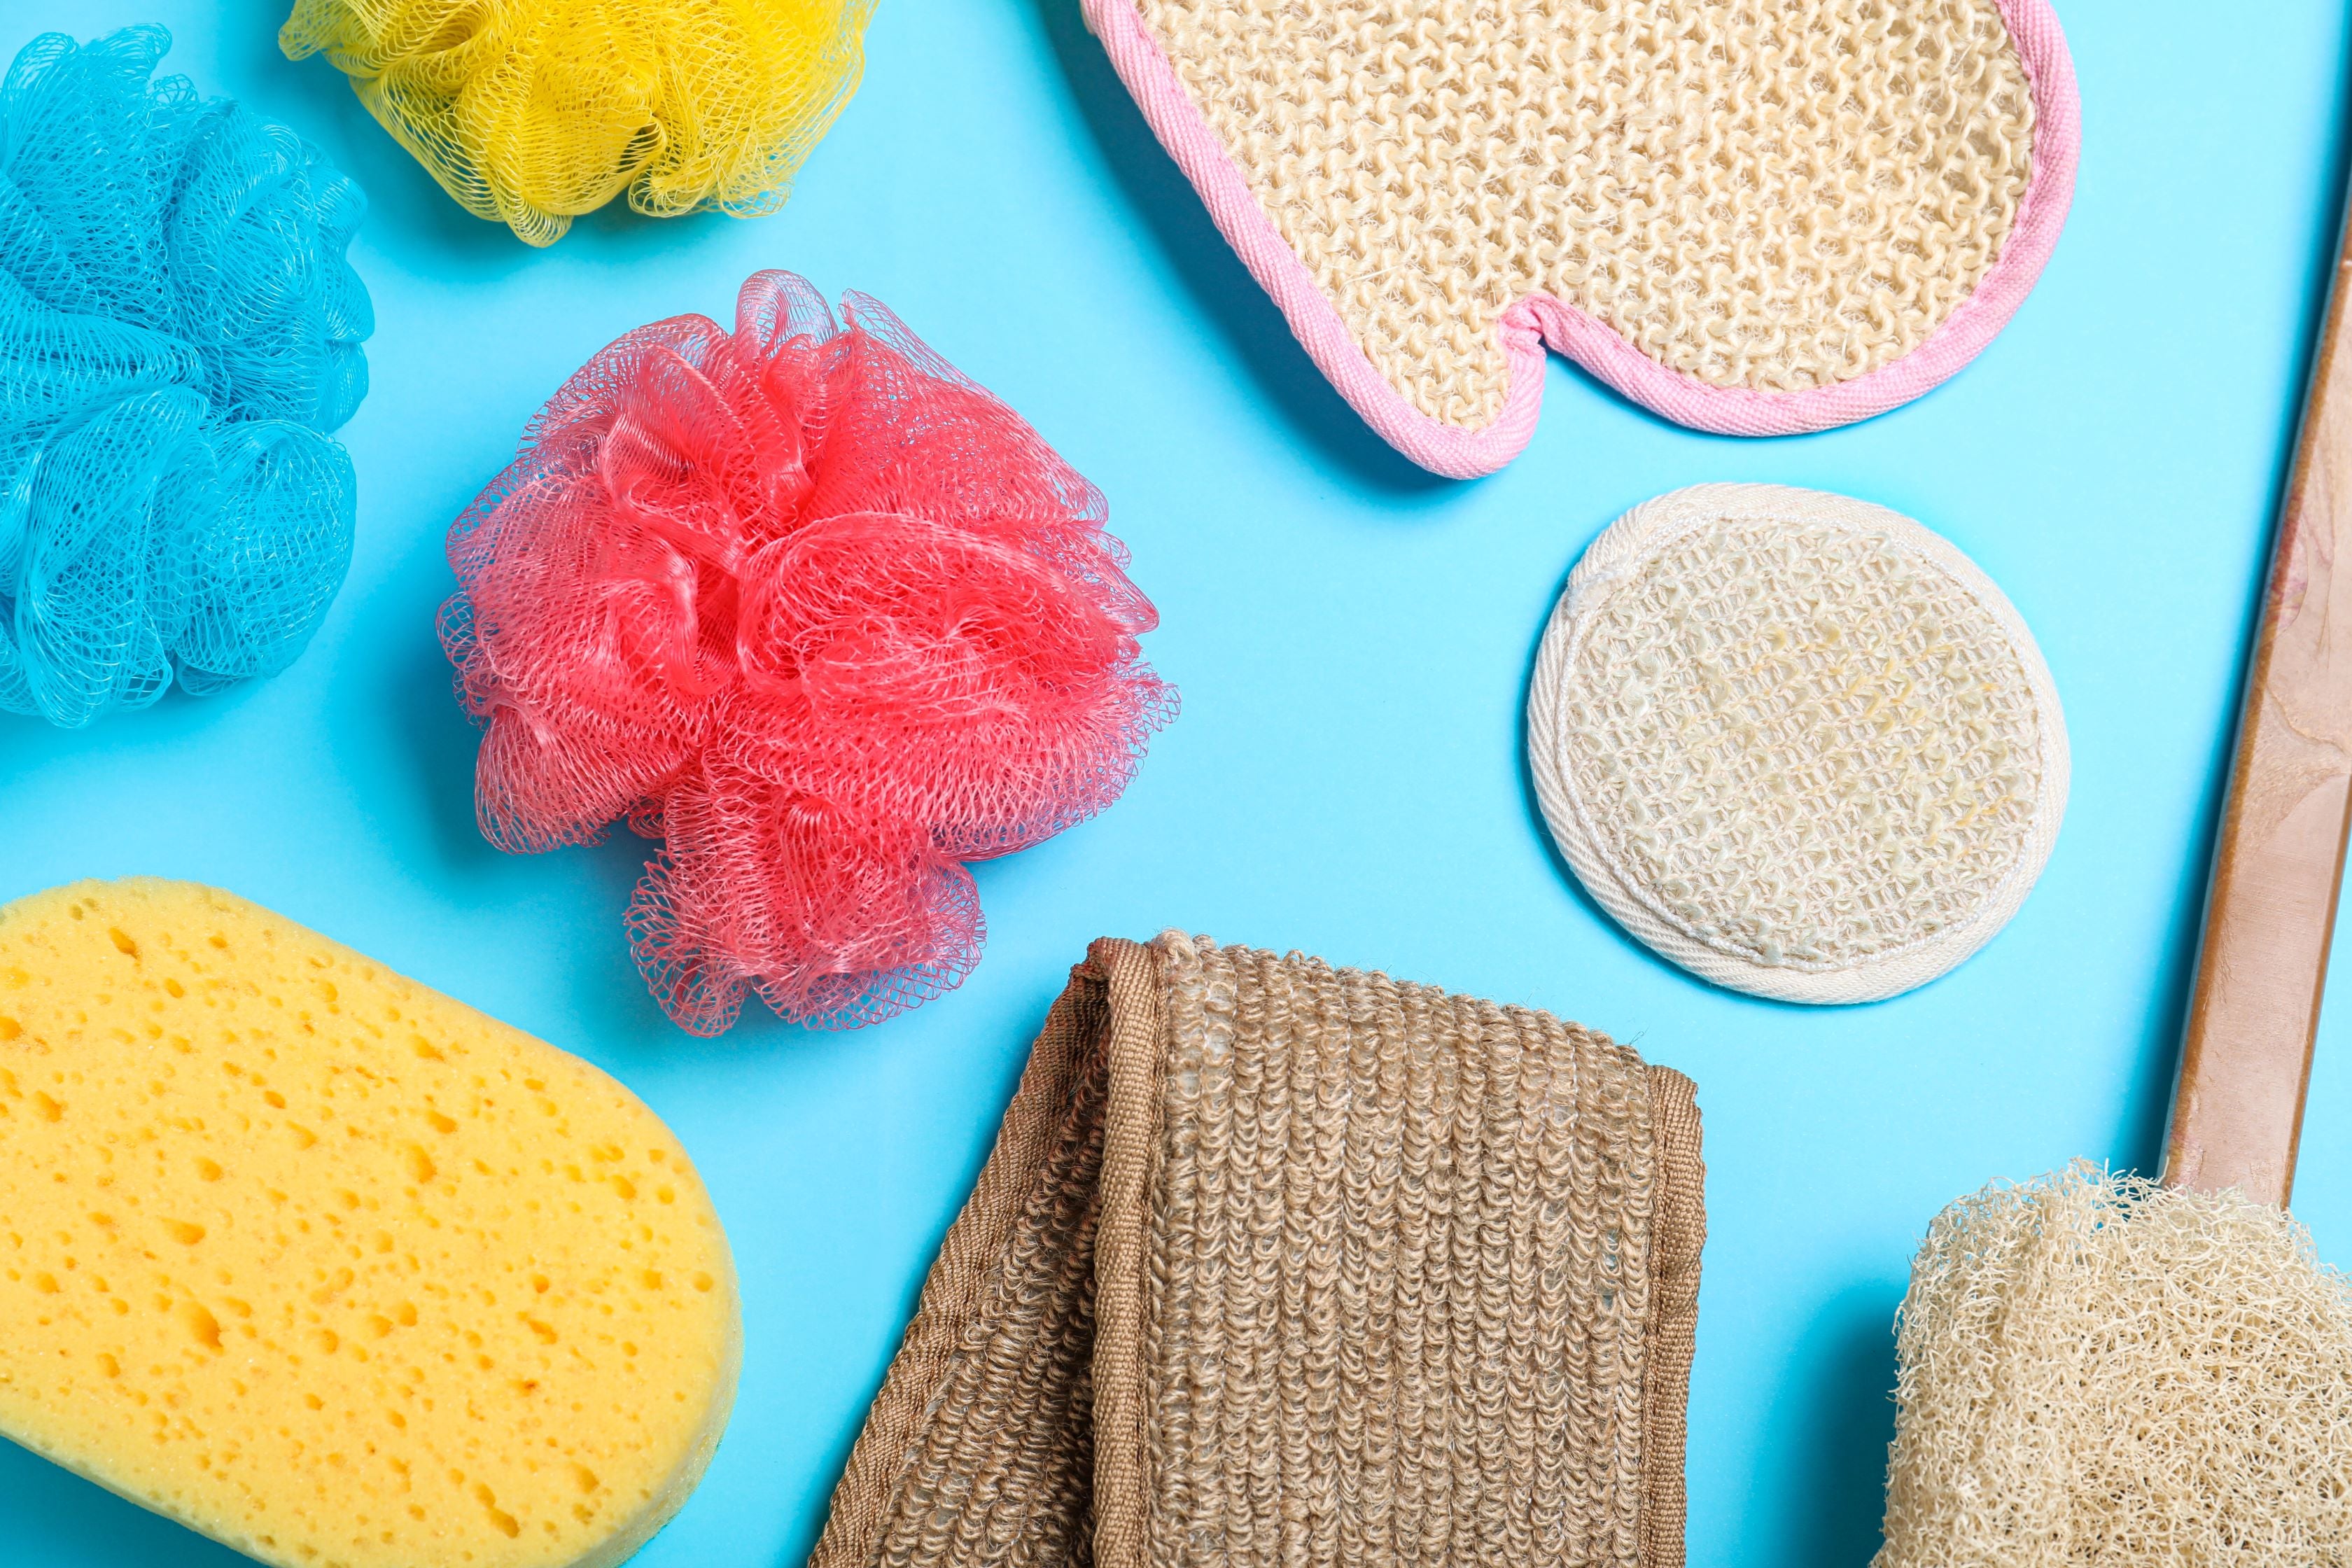 How to Choose the Perfect Sponge for Your Bath or Shower